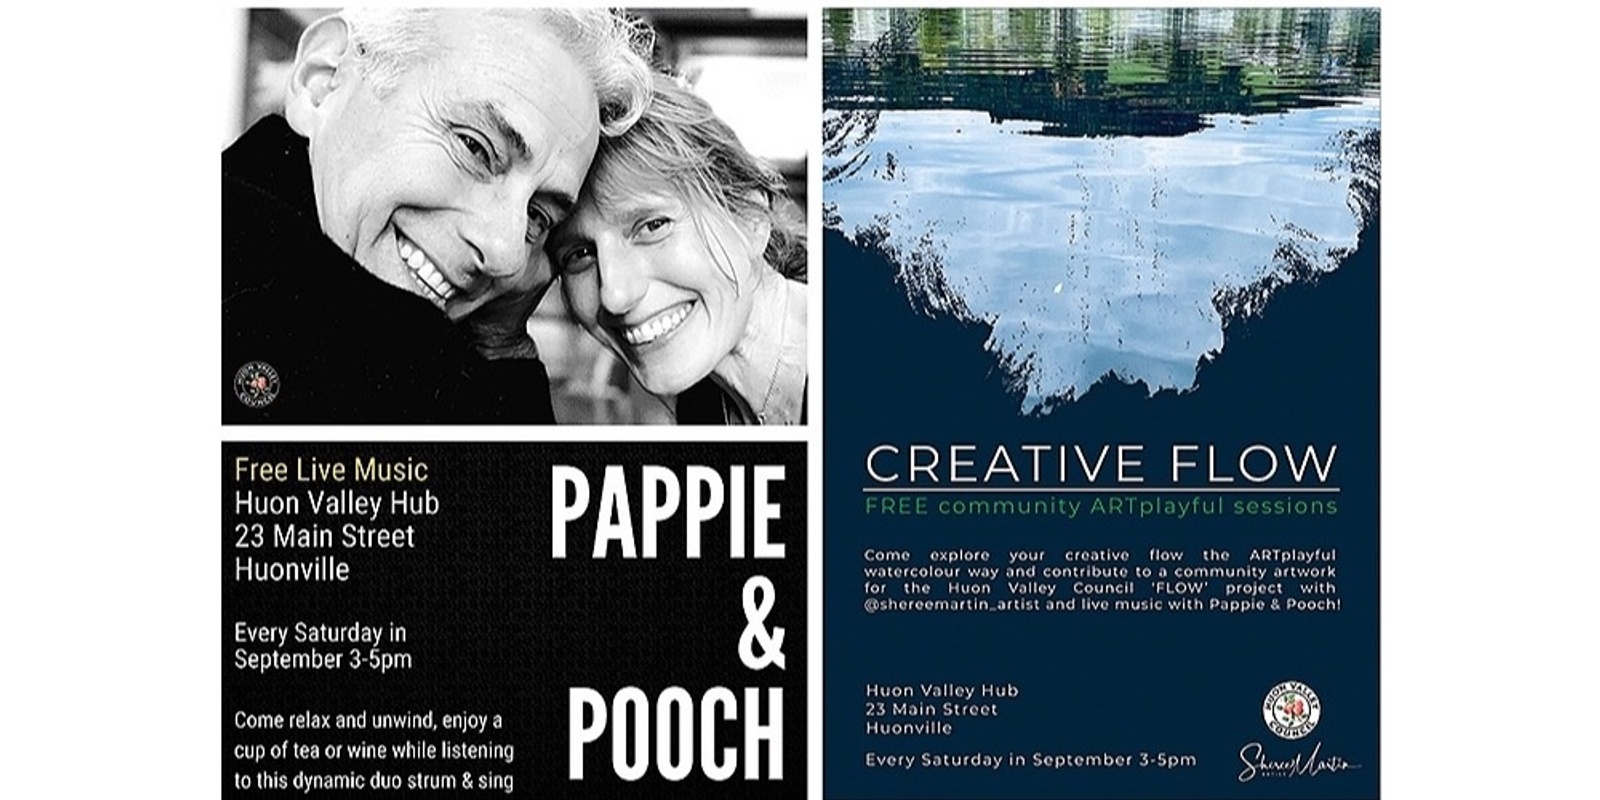 Banner image for Creative Flow ARTplayful Sessions + Live Music with Pappie & Pooch